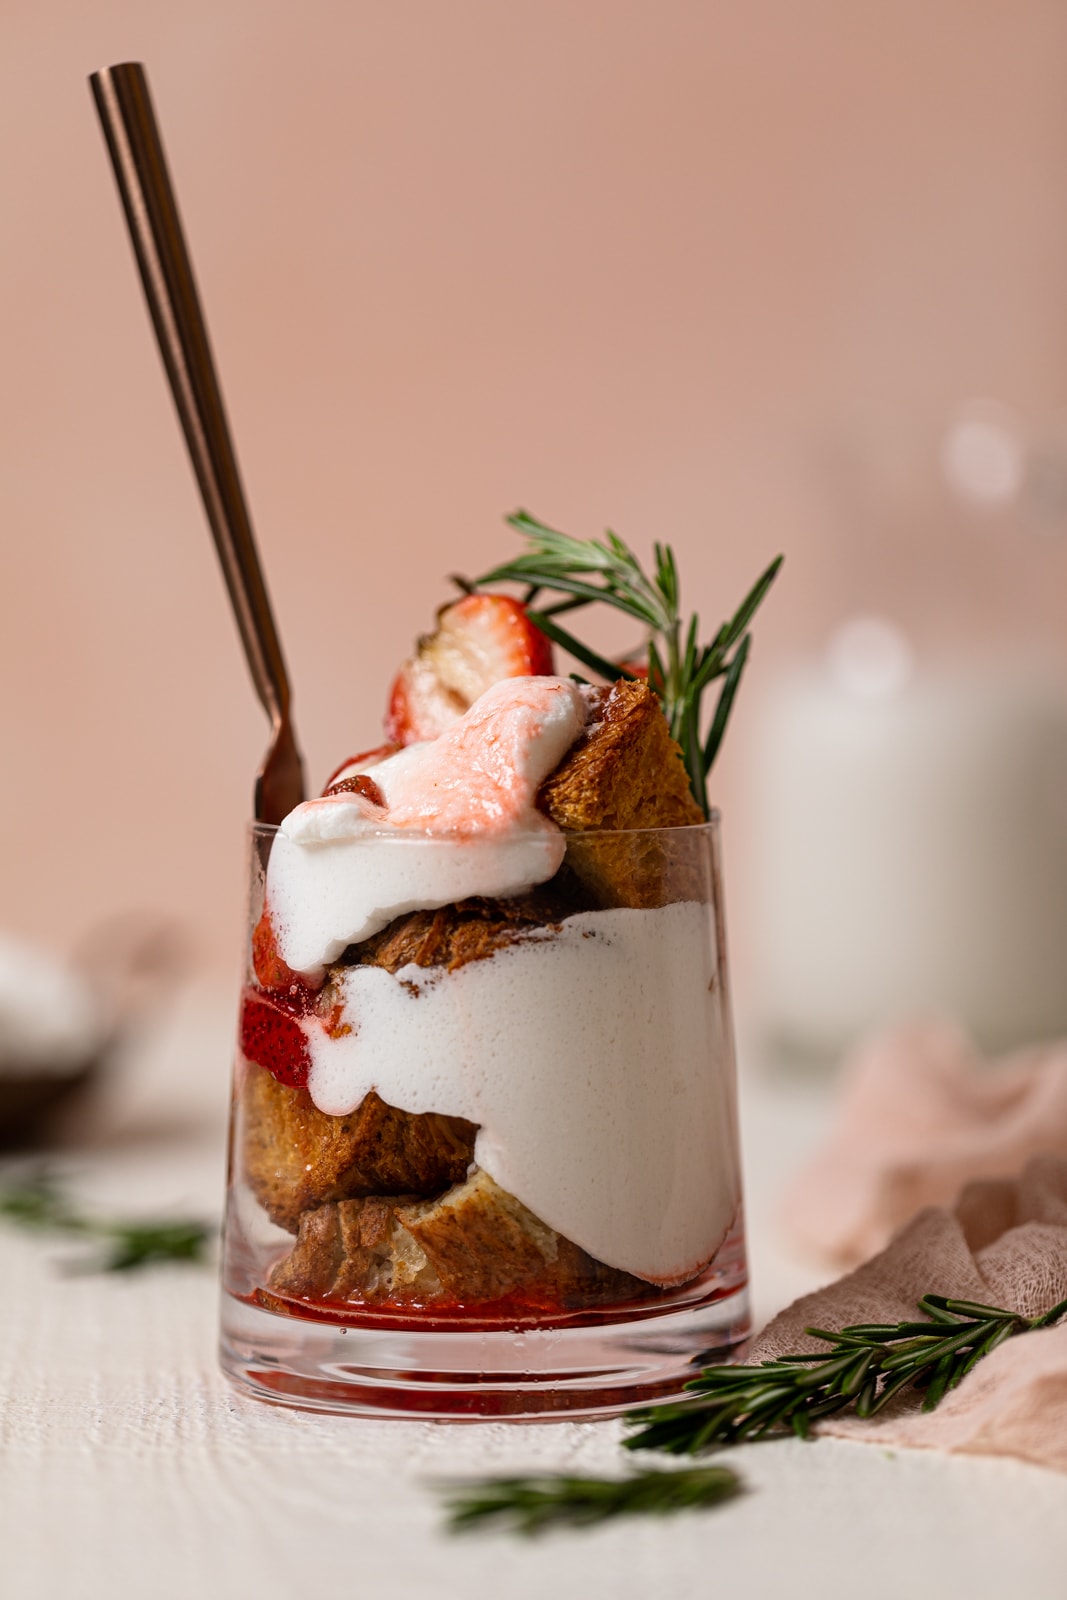 Spoon dipping into a Dairy-Free Strawberry French Toast Trifle